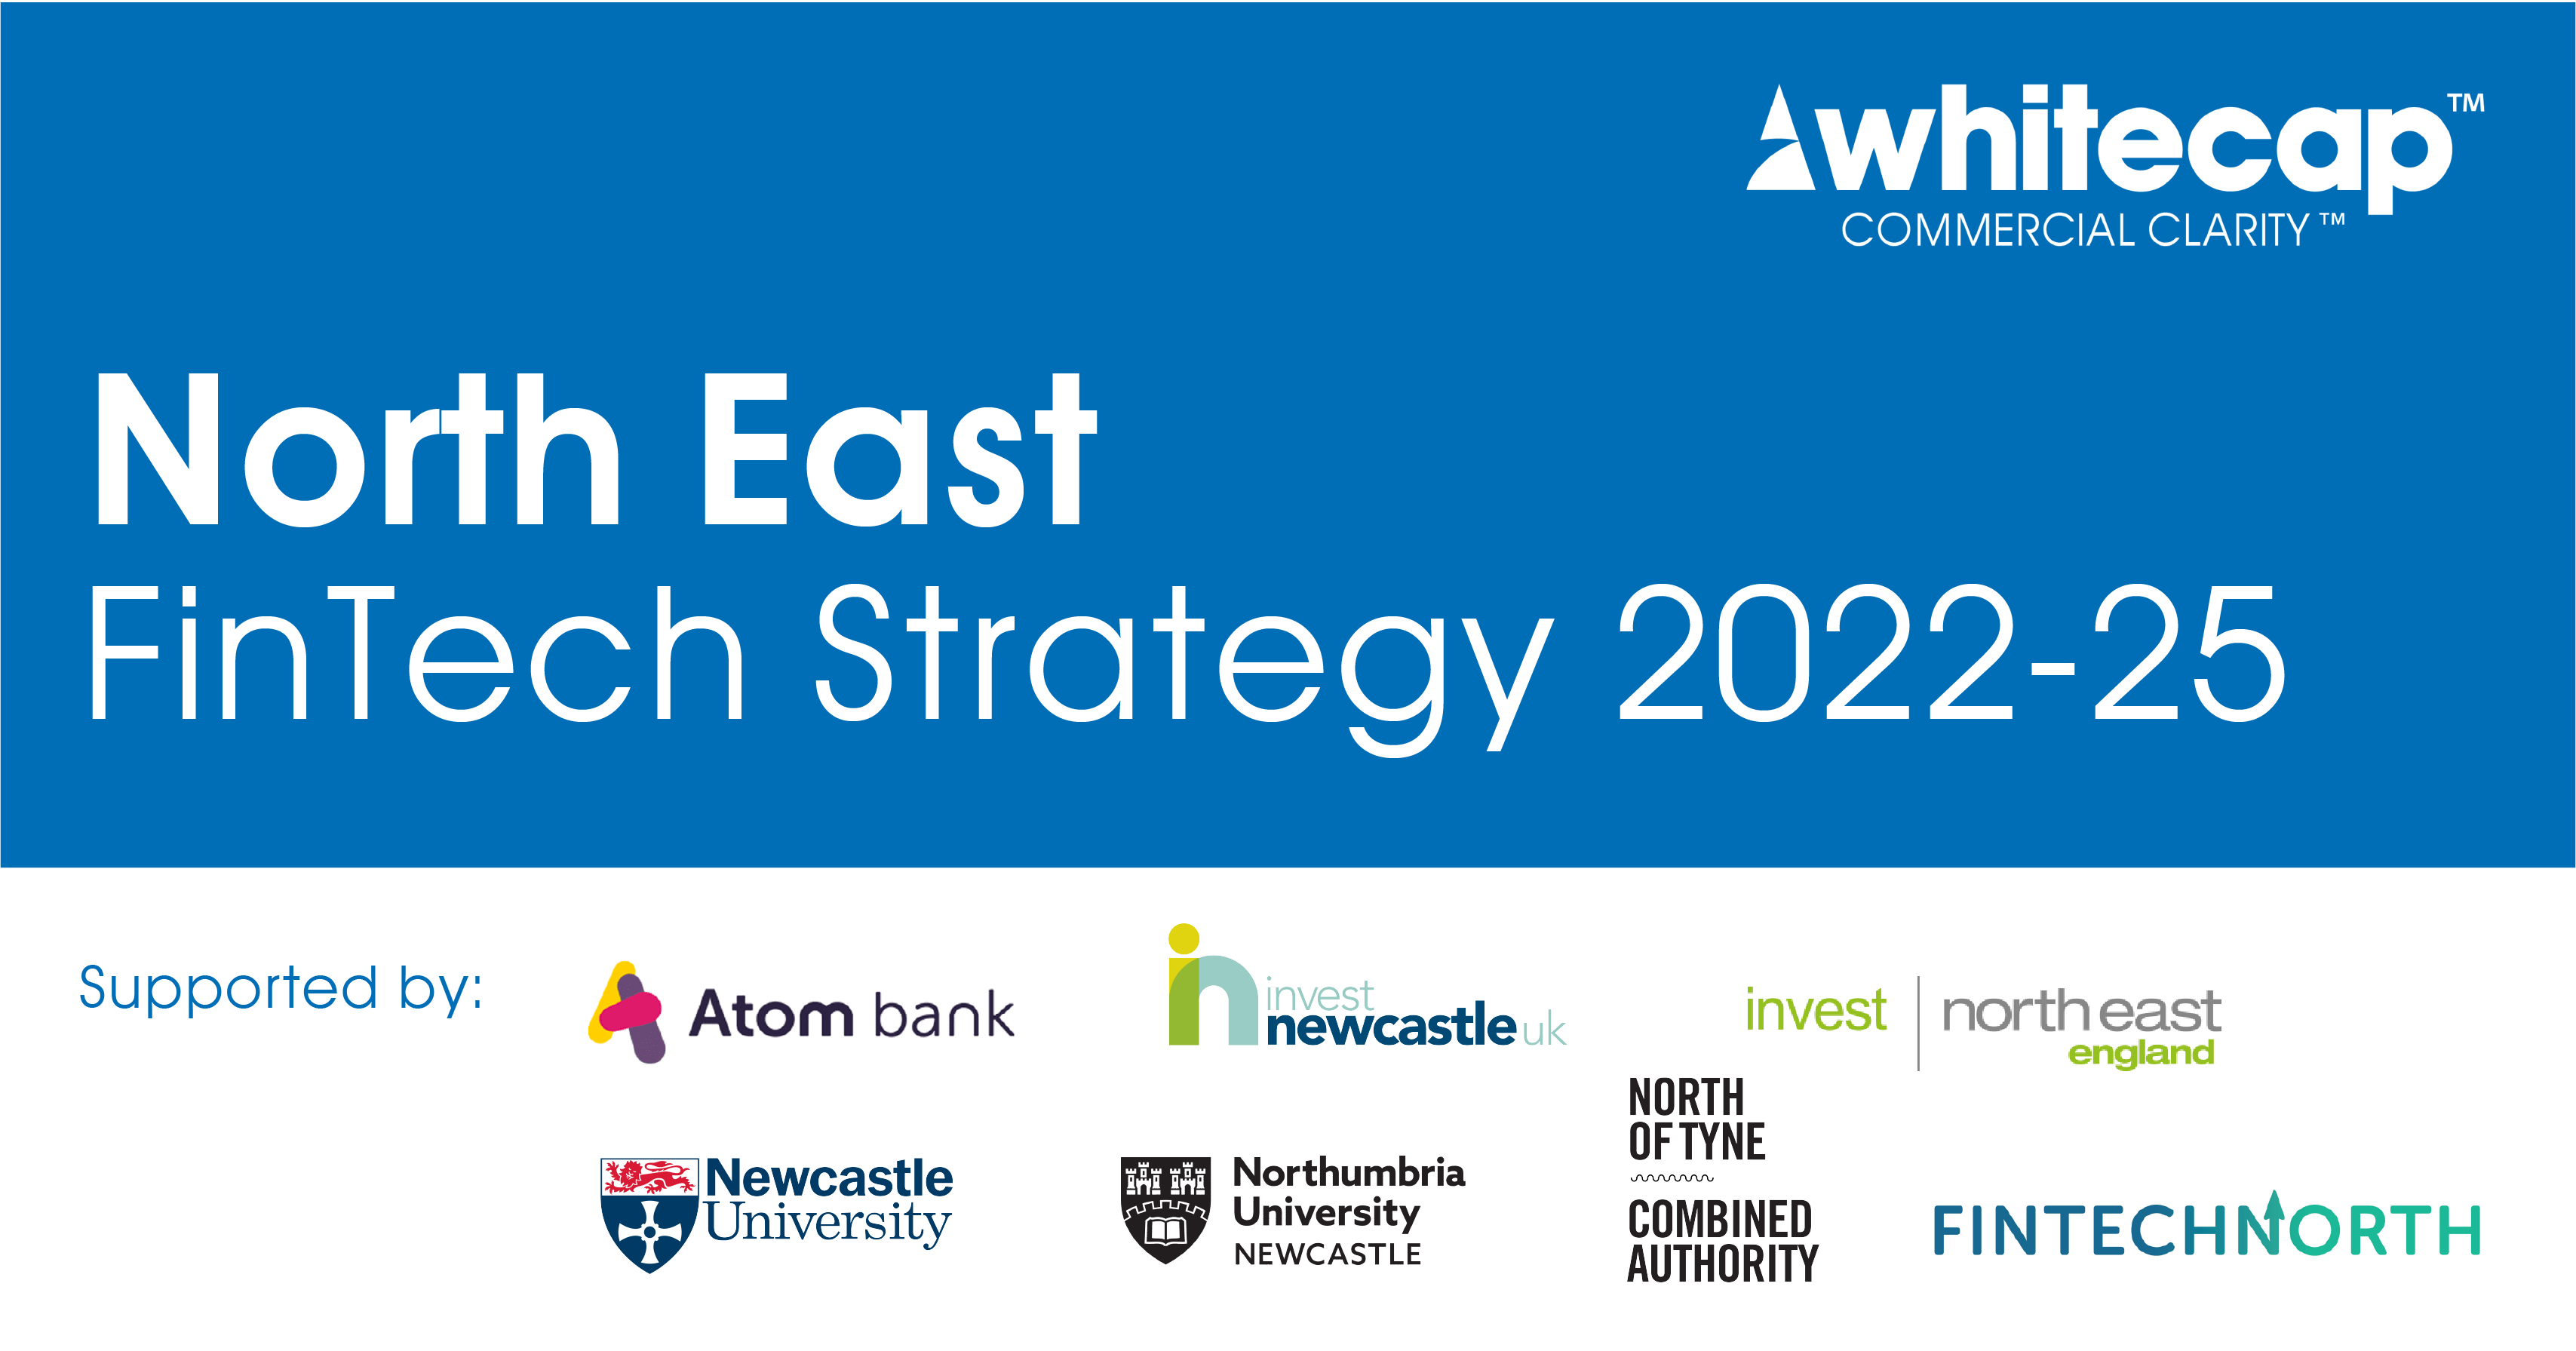 North East to develop 3 year FinTech strategy